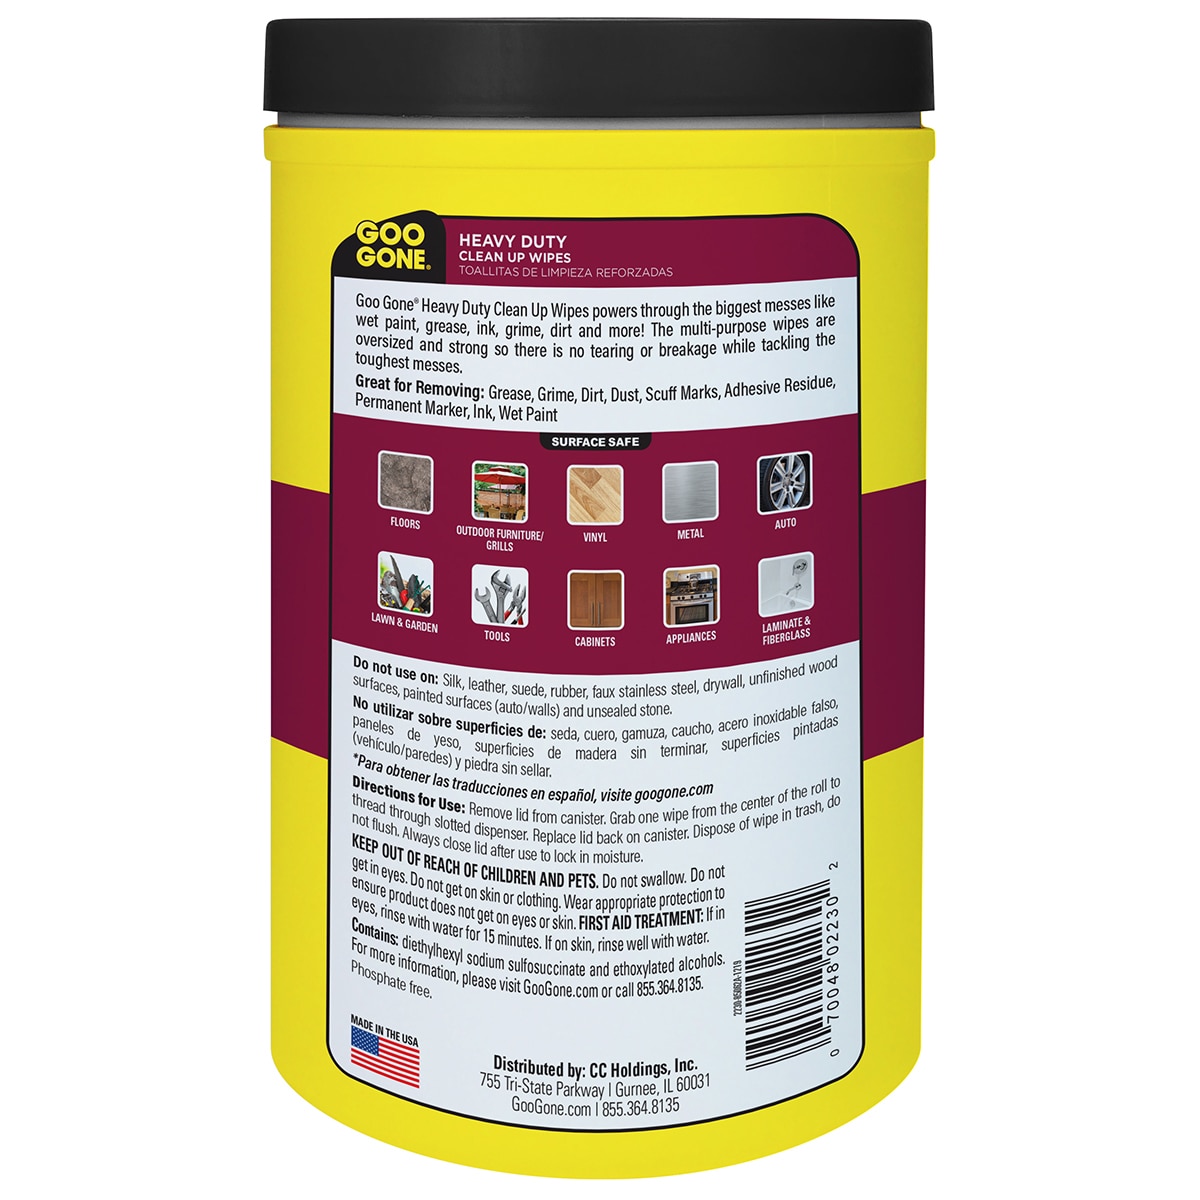 Goo Gone Heavy Duty Clean Up Wipes 75 Ct in the Paint Cleanup